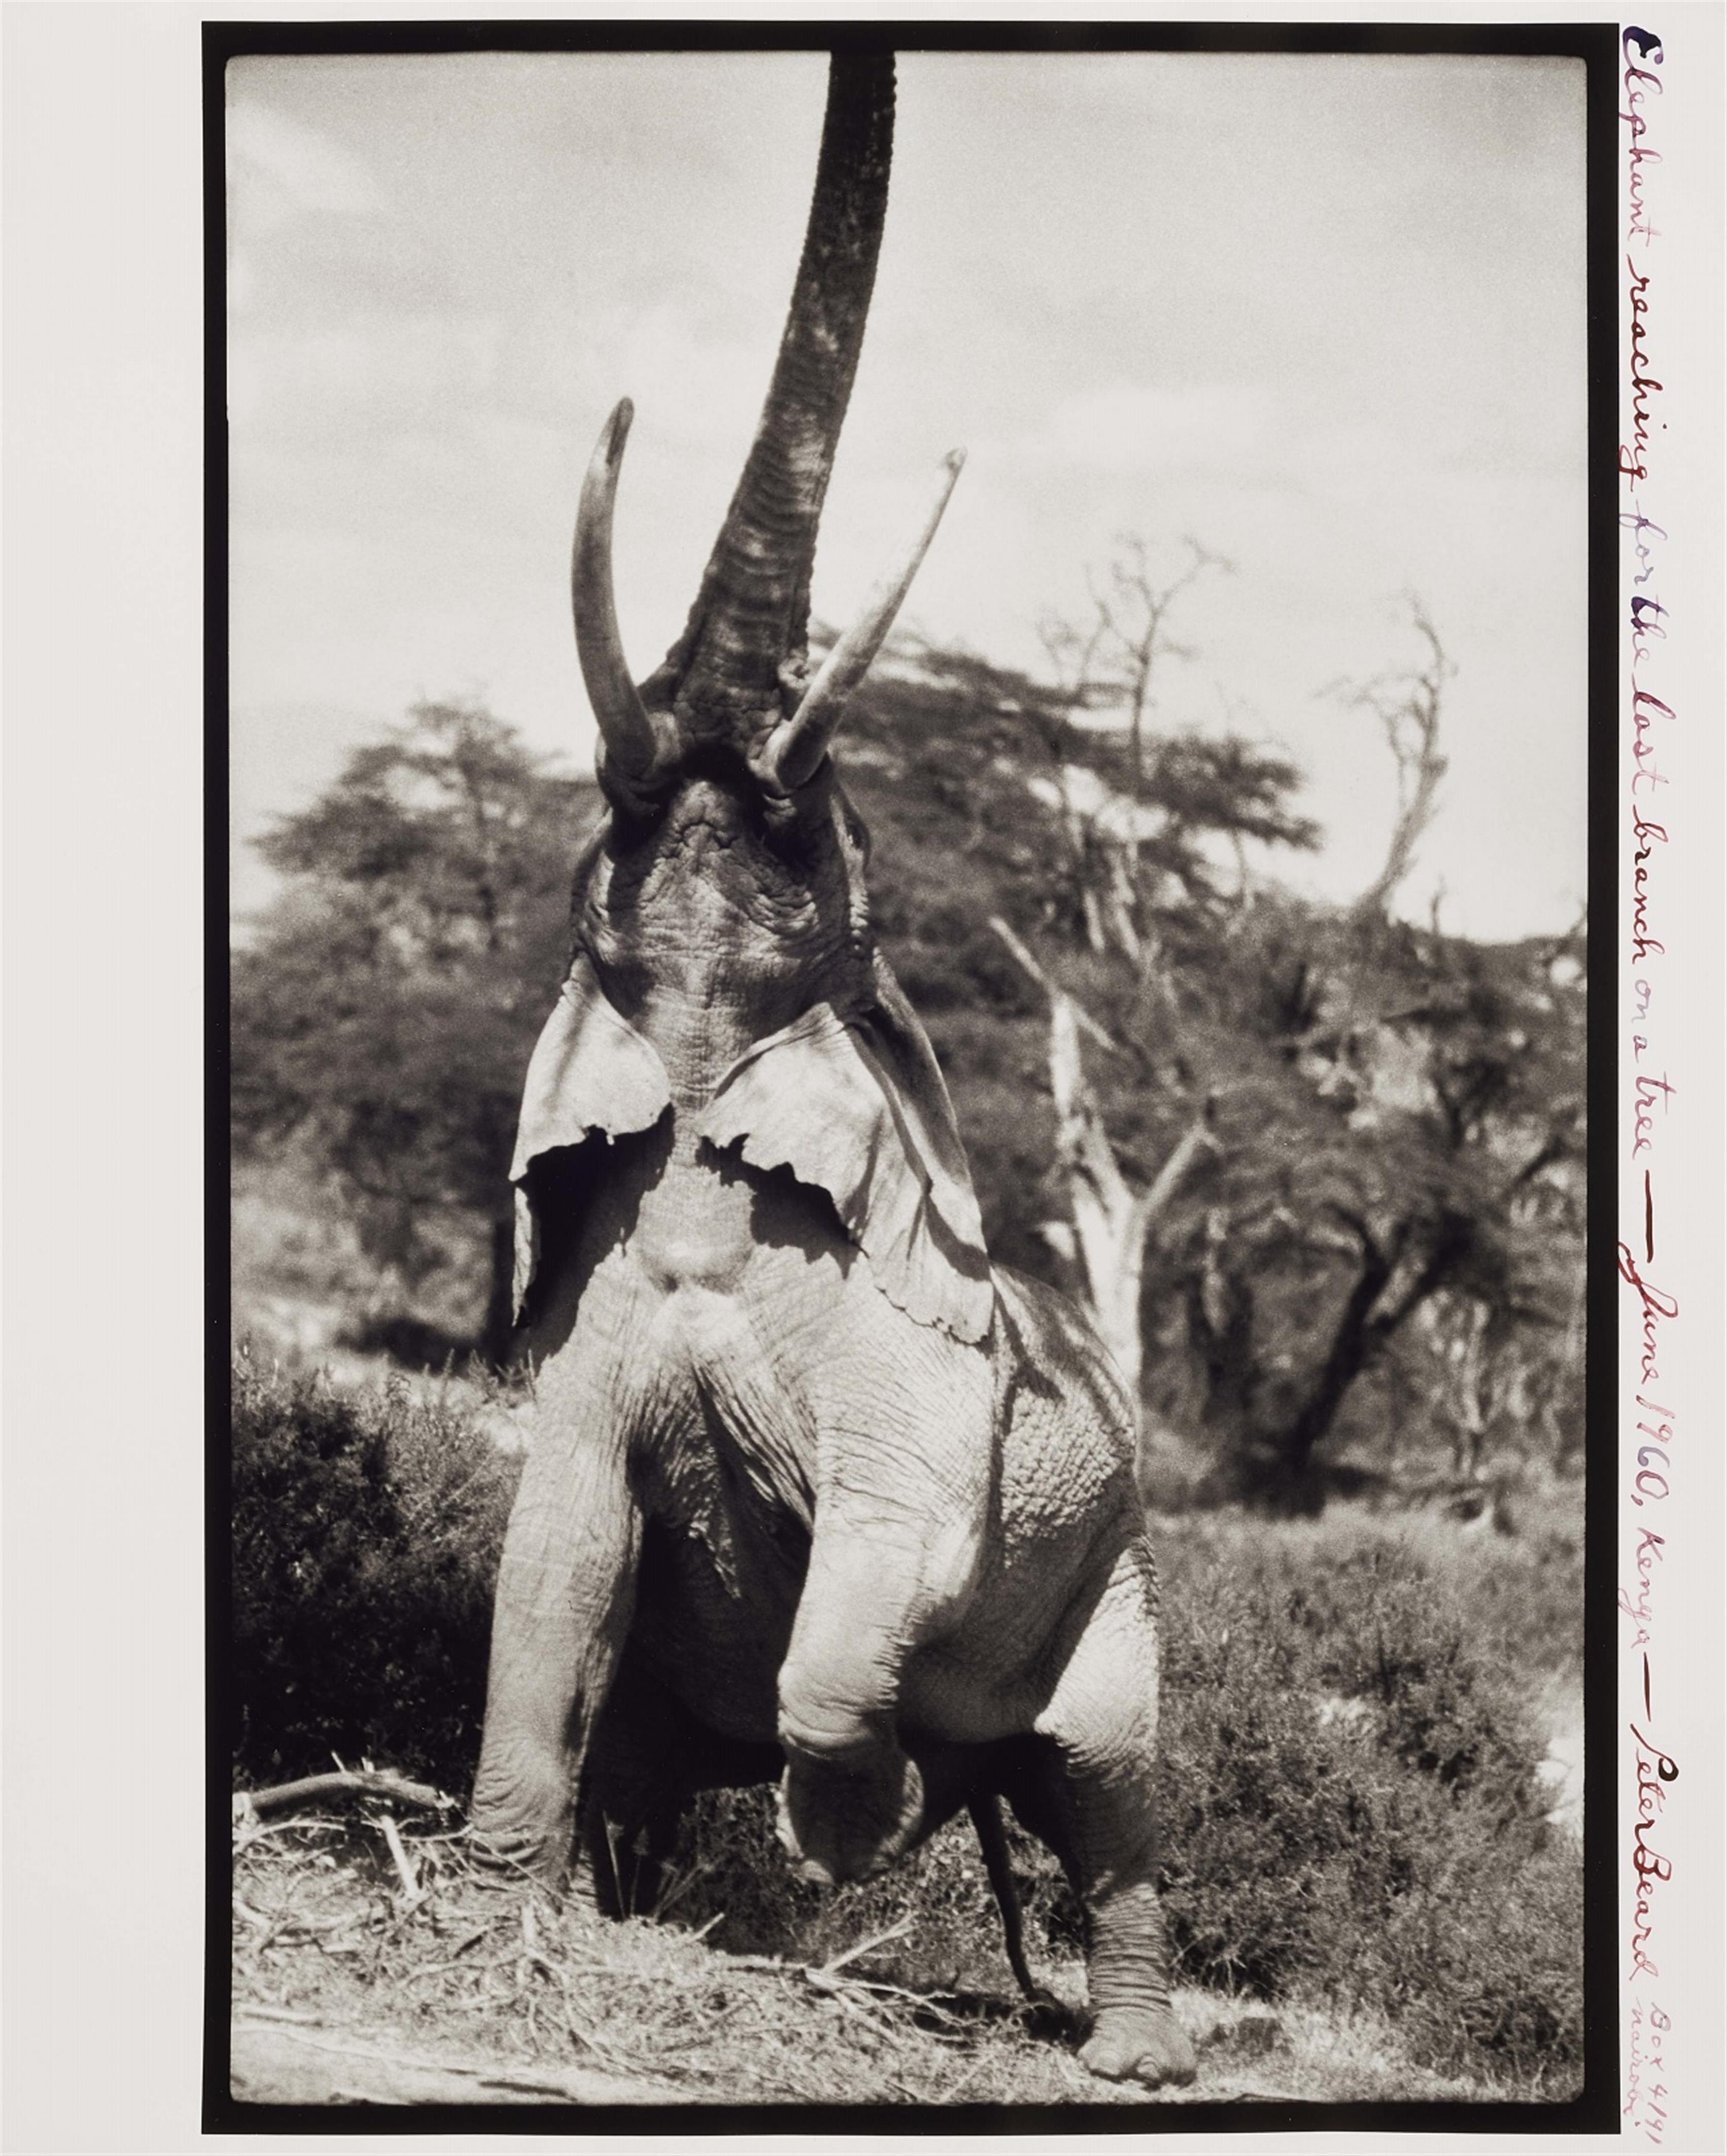 Peter Beard - Elephant reaching for the last Branch on a Tree, Kenya - image-1